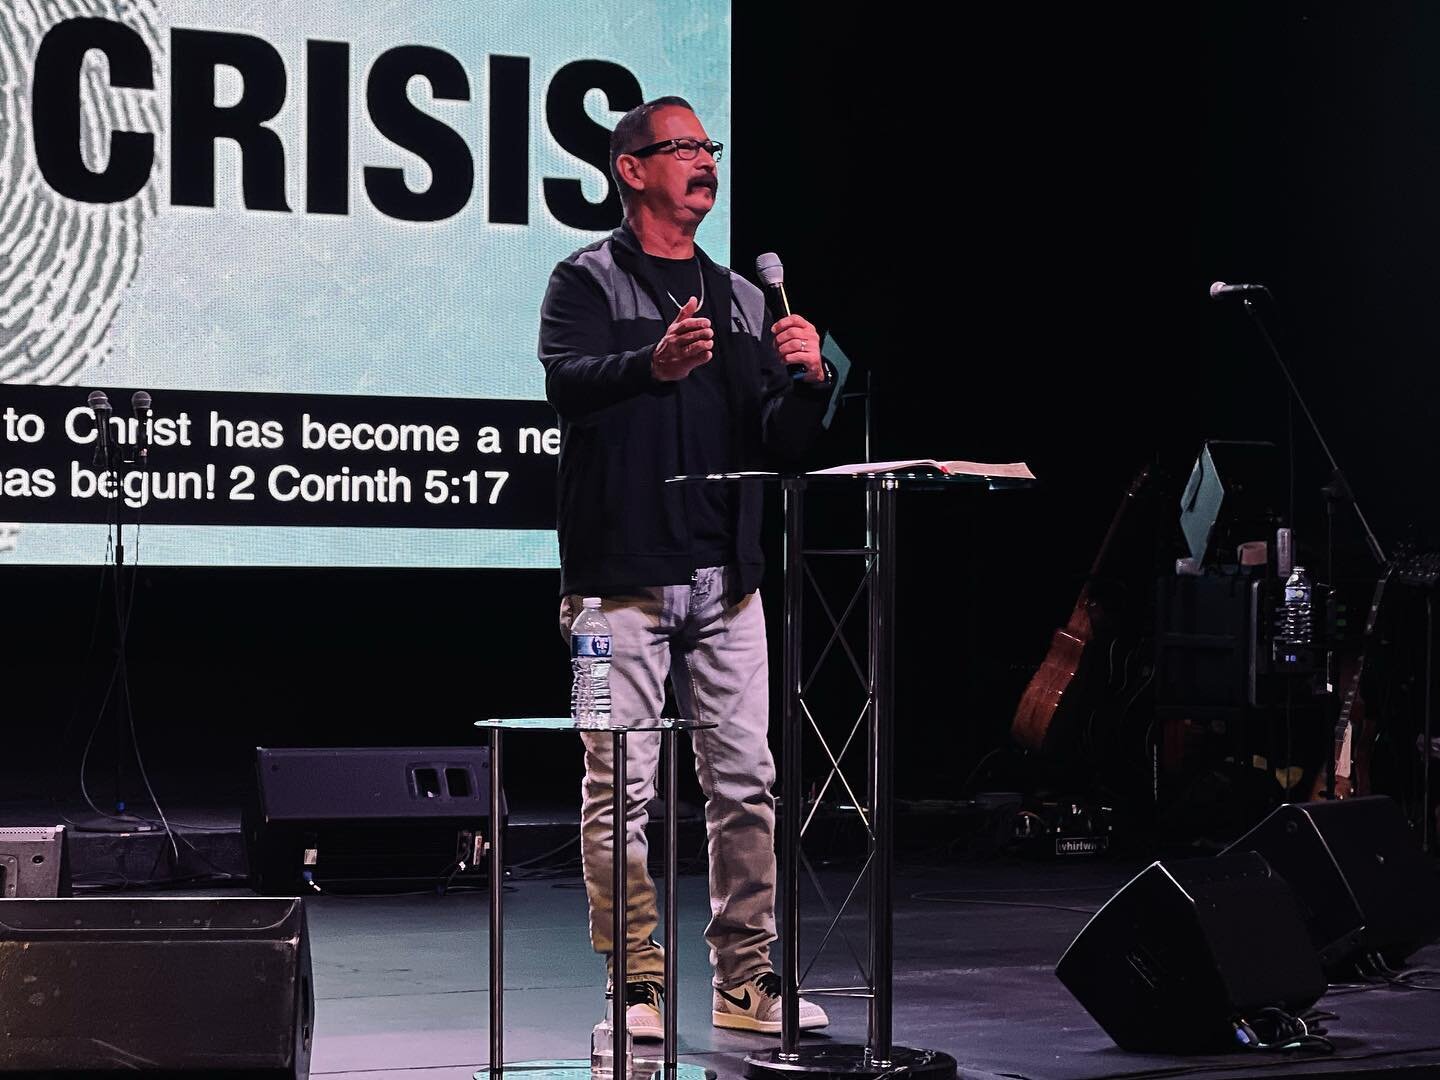 Today Pastor started a new series &ldquo;Identity Crisis&rdquo;! If you were unable to make it out be sure to visit our YouTube or Facebook page to view the whole service! 
We can&rsquo;t wait to see you Sunday Morning for our Mothers Day Service!